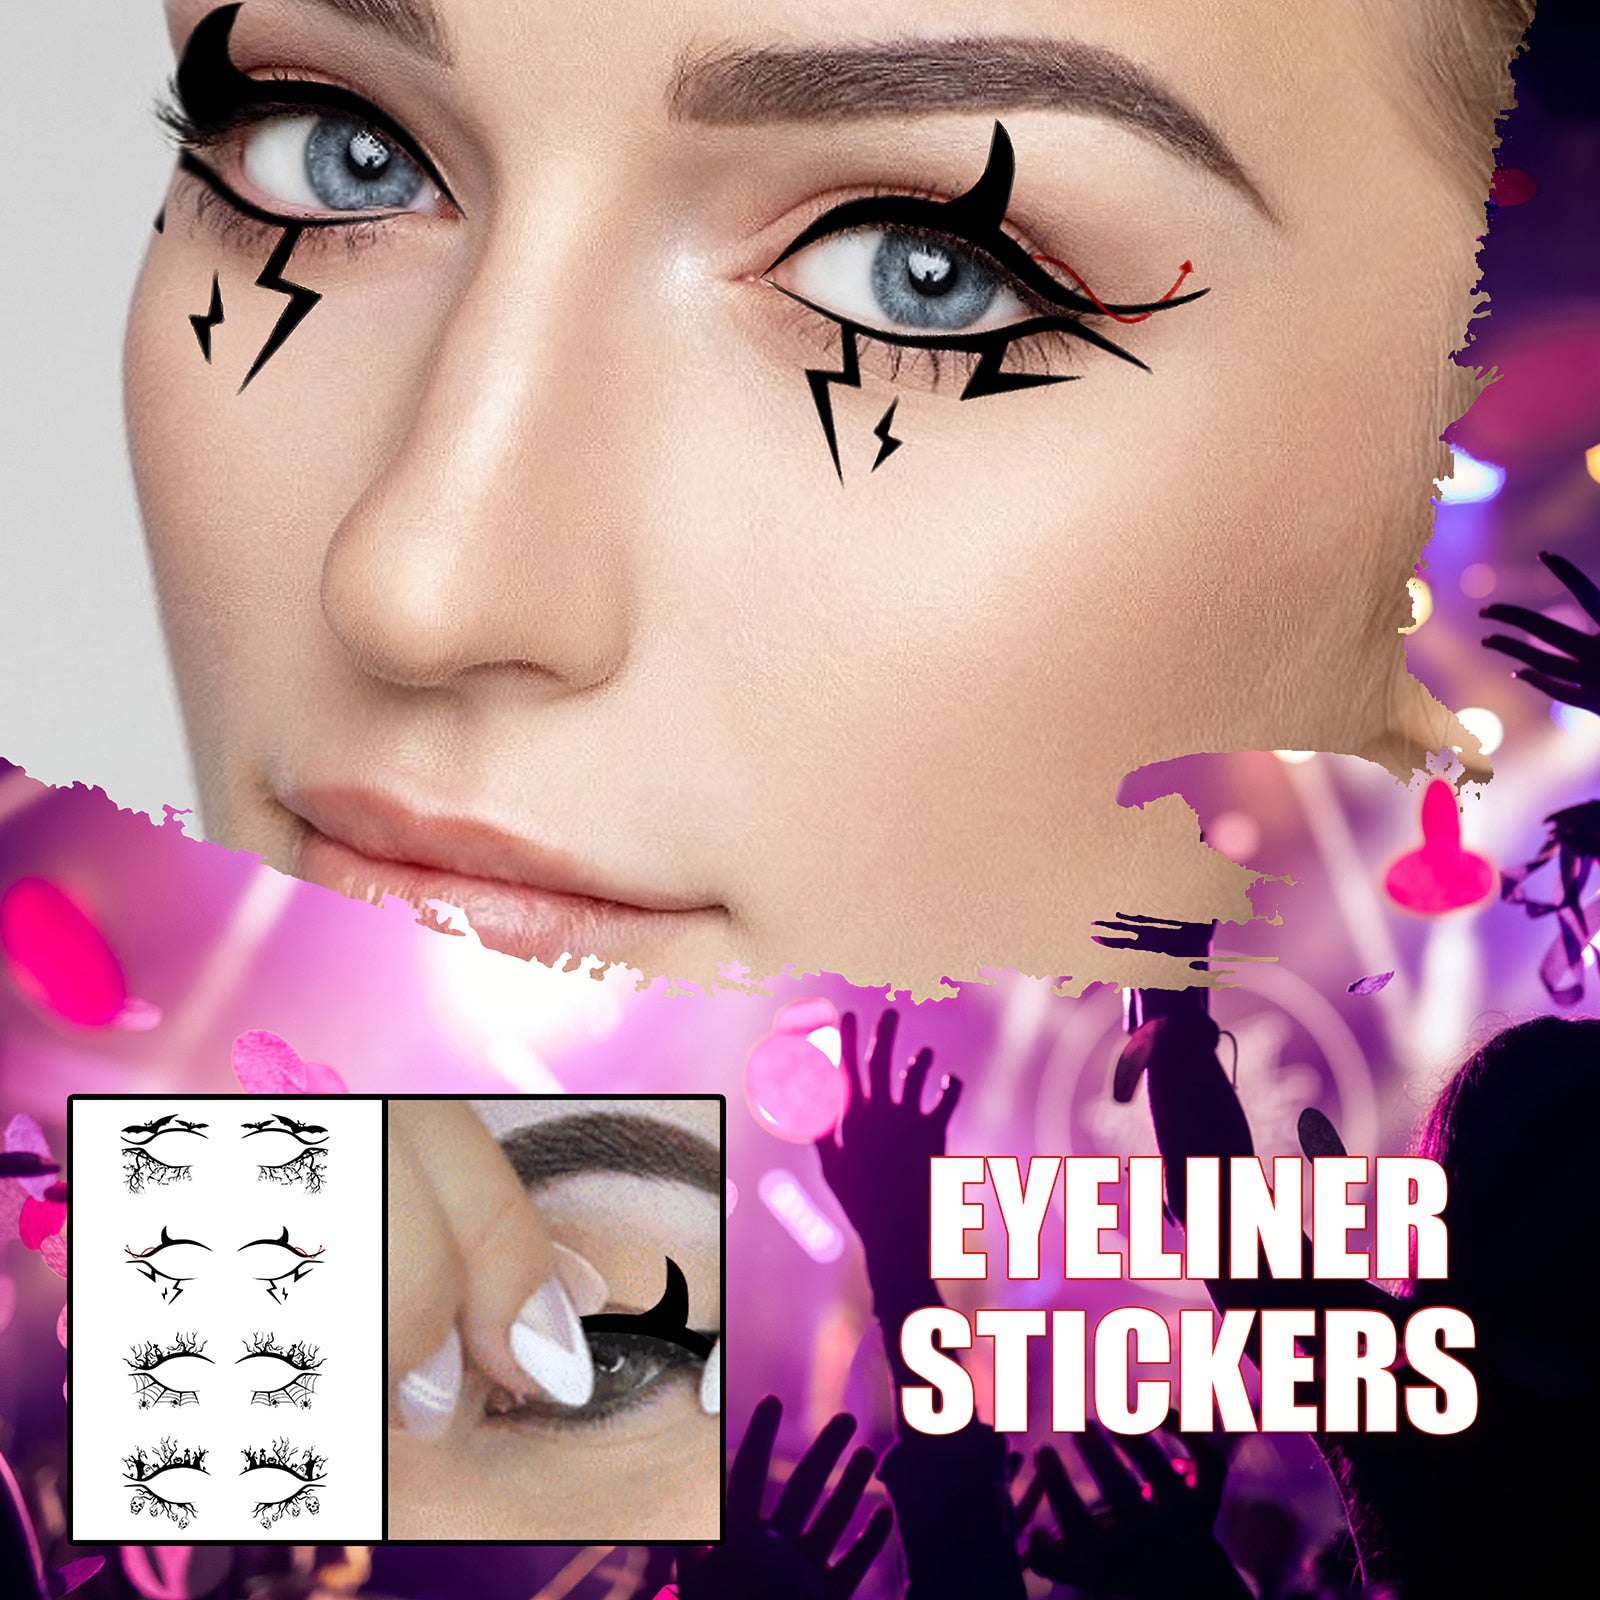 4 Pairs Halloween Eyeliner Stickers Horror Fashion Party Makeup Tools Spider Bat Decorative Eyeliner Eyeshadow Stickers for Wome